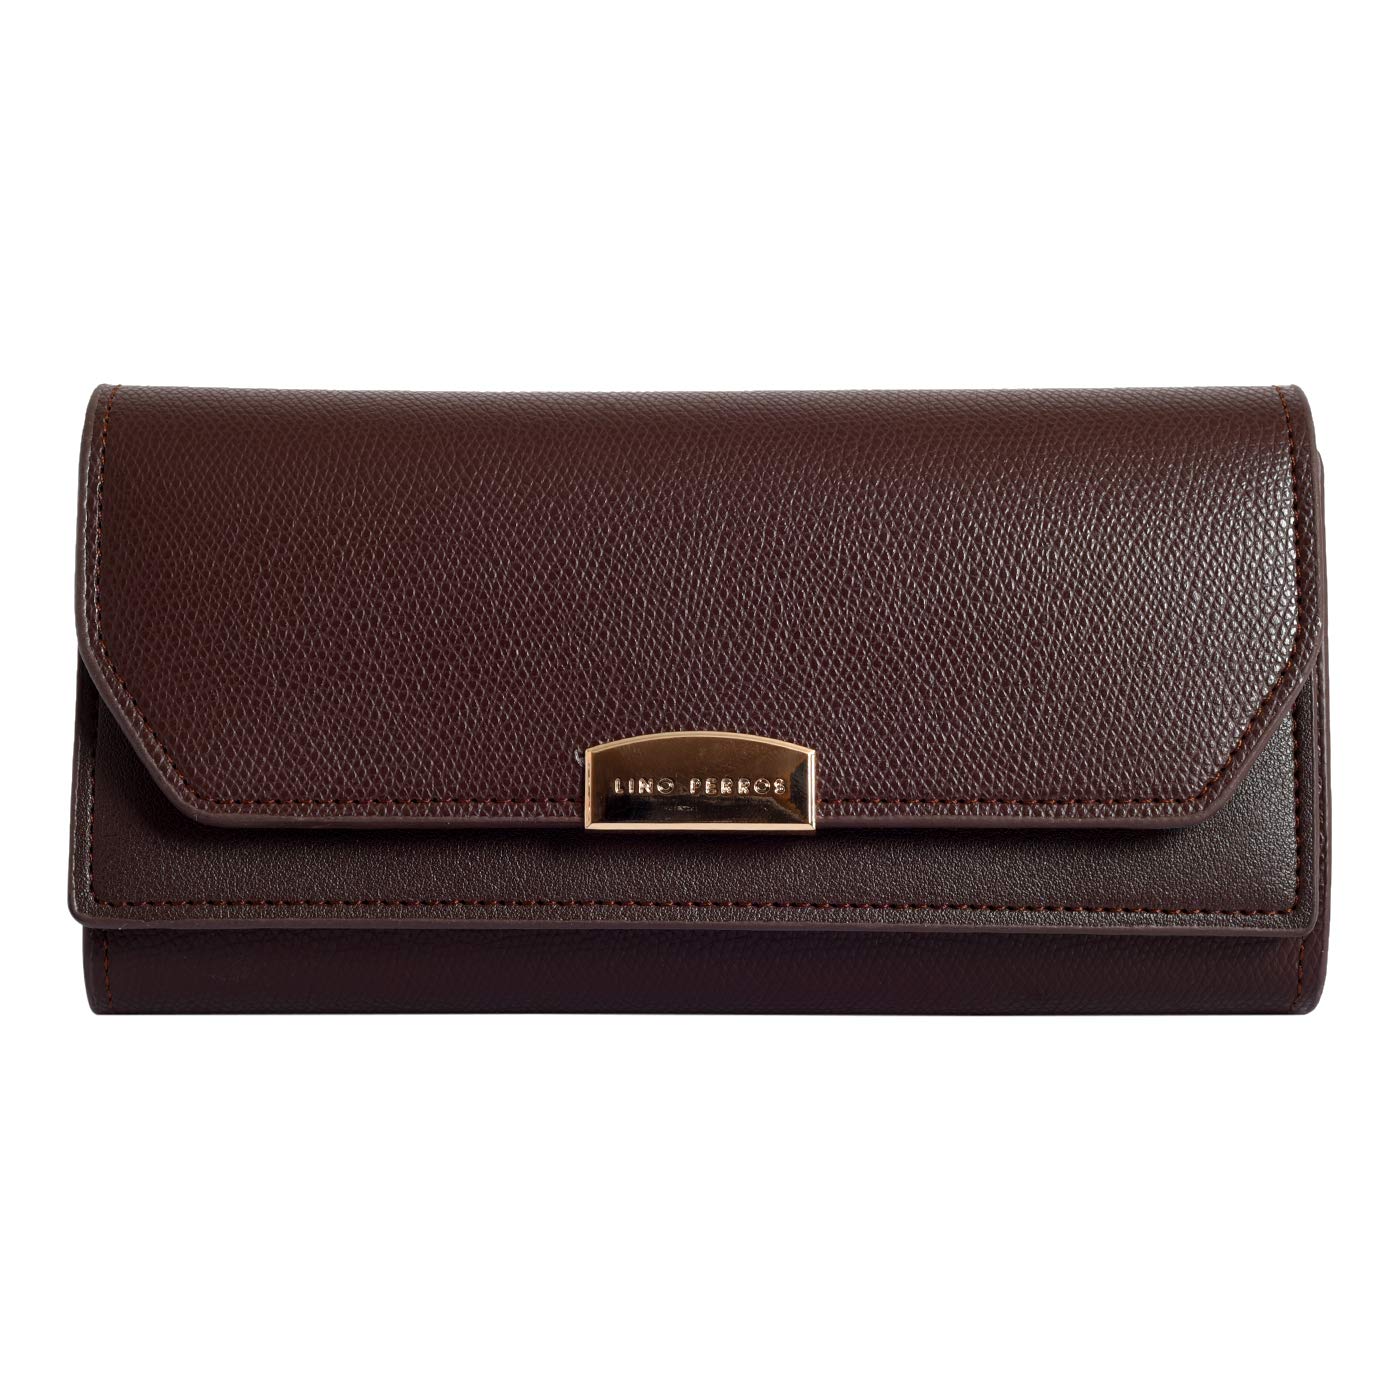 Lino Perros Women's Wallet (Brown) Price in India